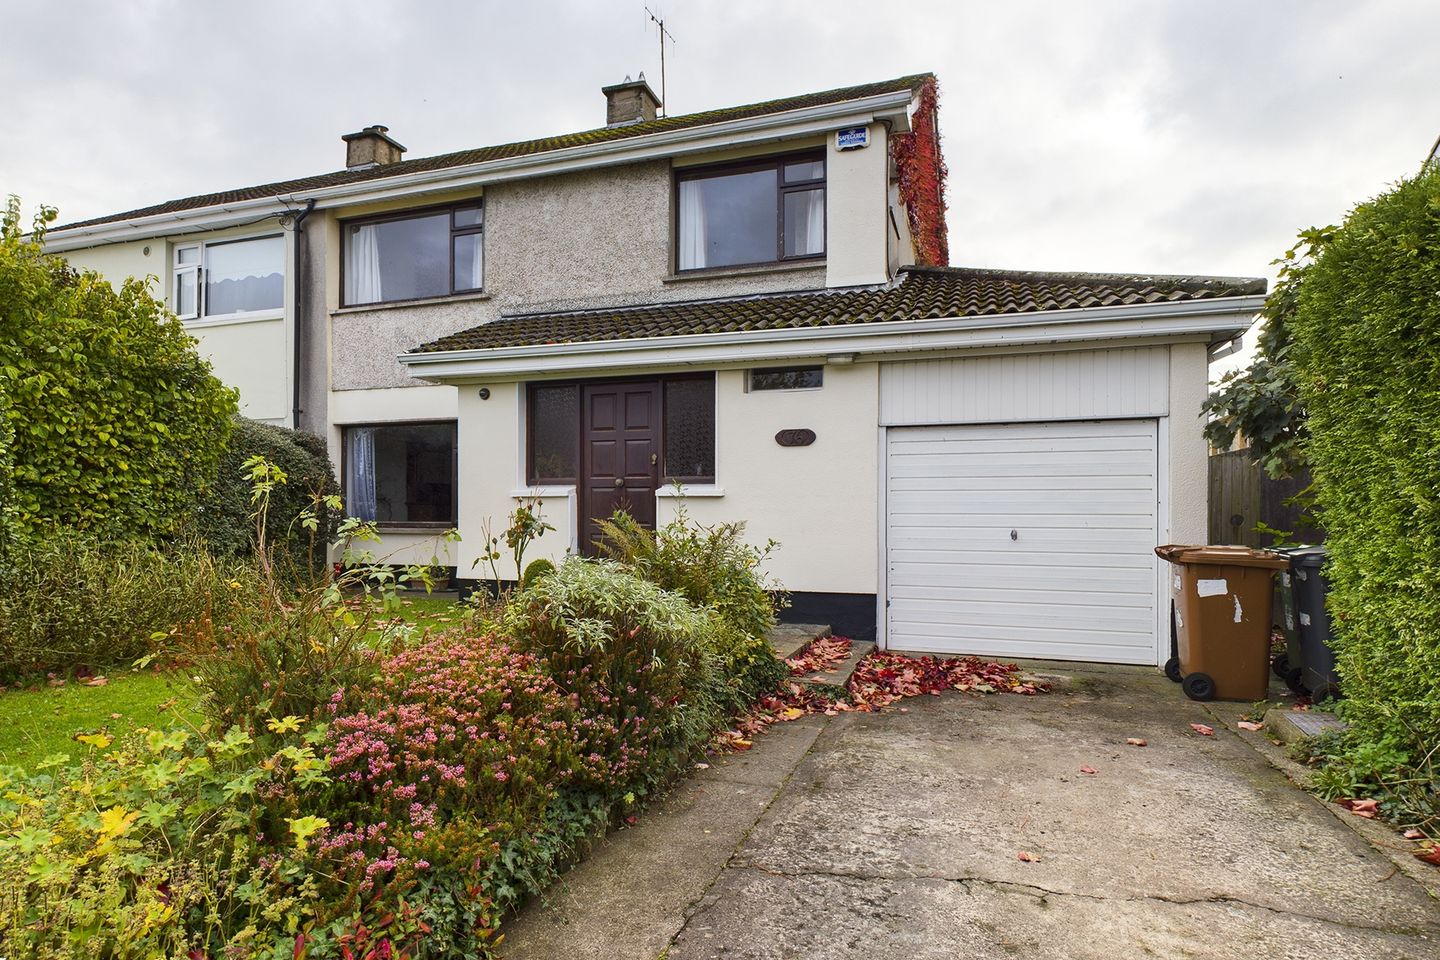 76 Viewmount Park, Dunmore Road, Waterford City, Co. Waterford